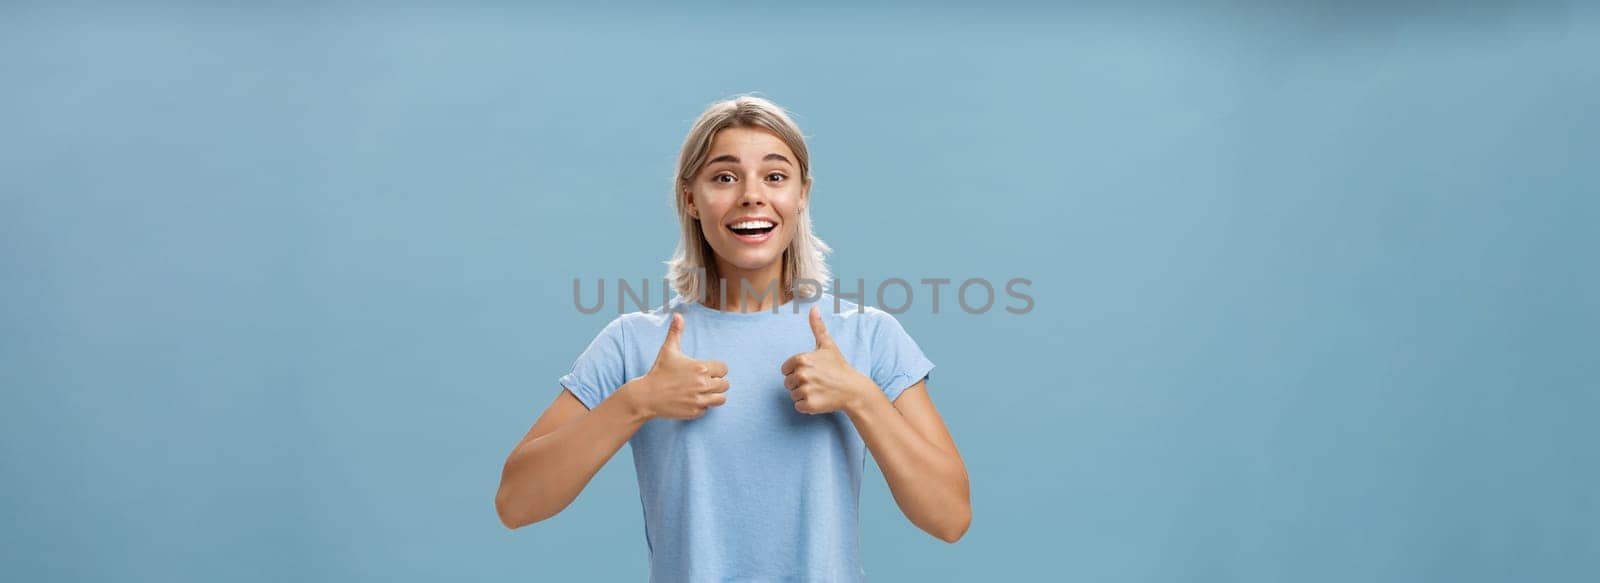 You did great proud of you. Portrait of satisfied and fascinated attractive happy girlfriend in casual t-shirt showing thumbs up and smiling broadly being supportive and cheerful over blue wall.